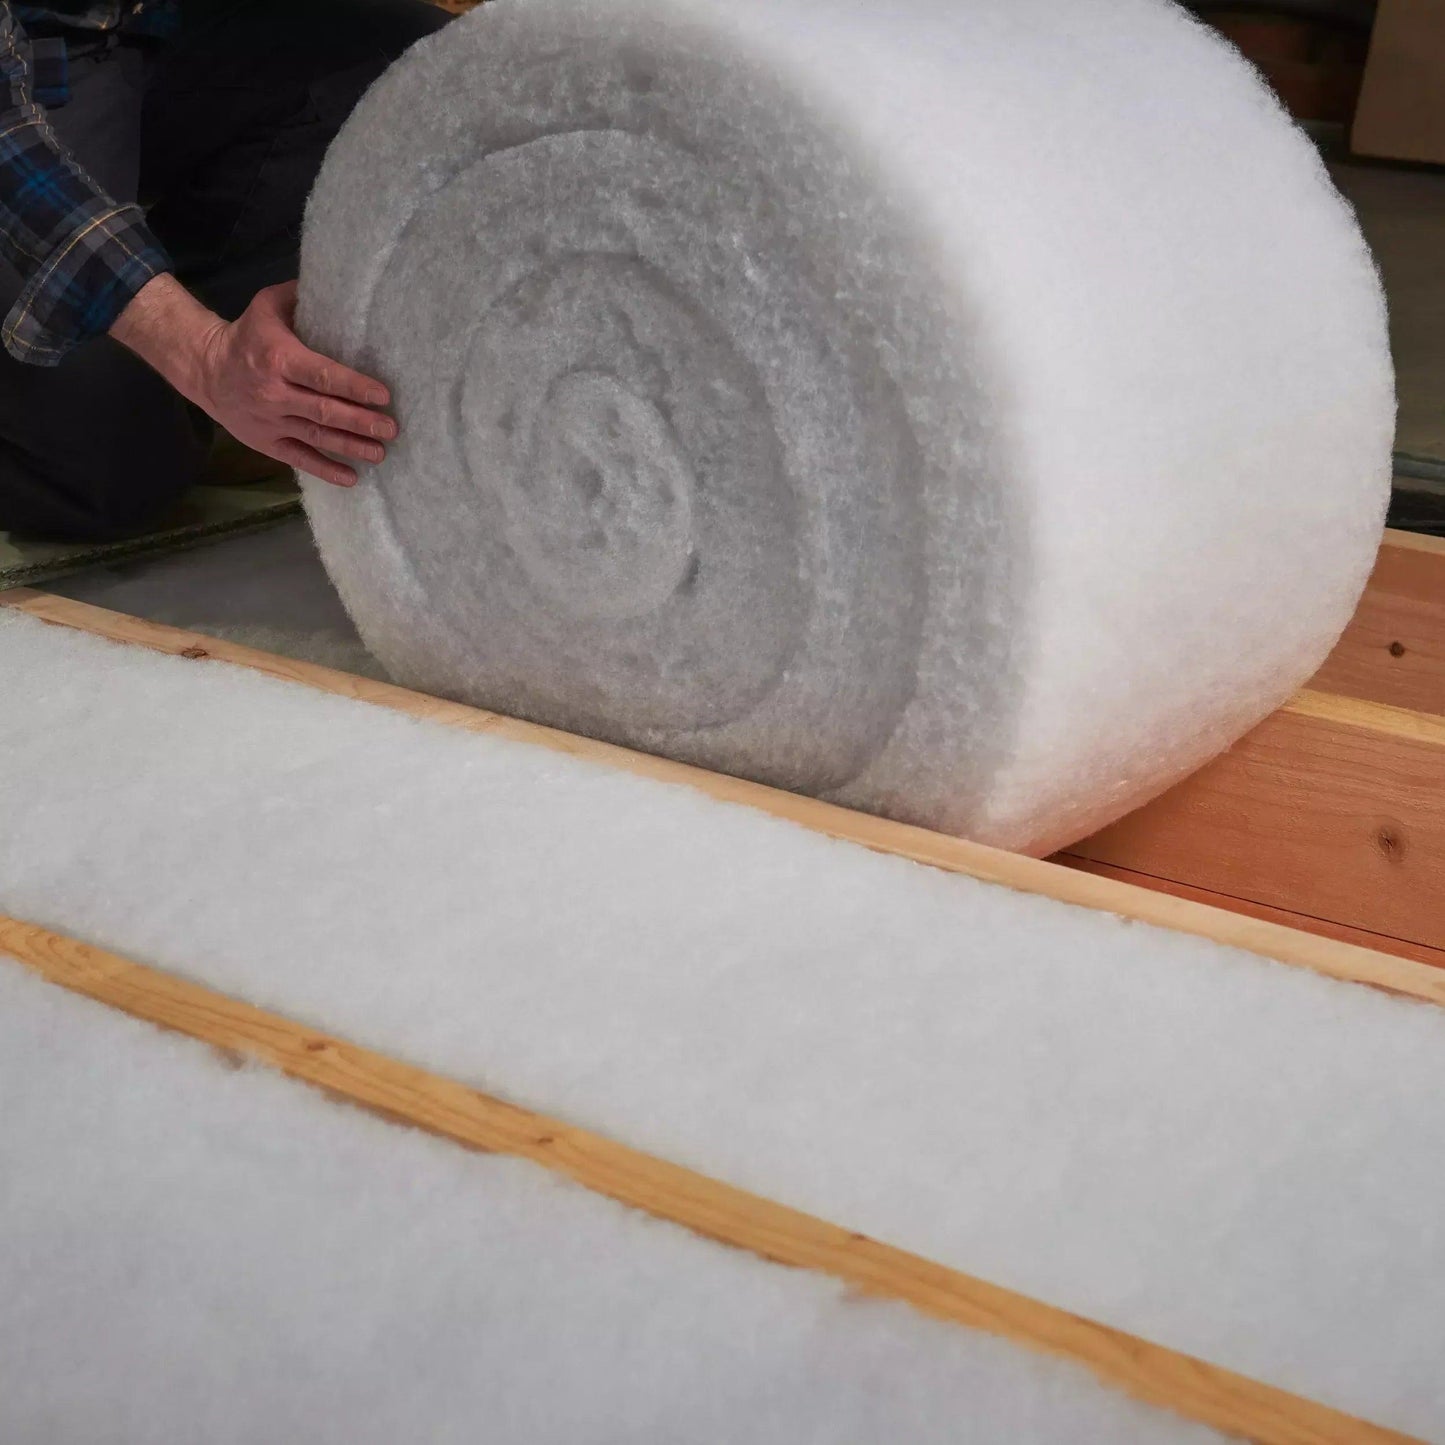 390mm Width - Eco Friendly Itch Free Thermal Insulation Roll - HighLoft